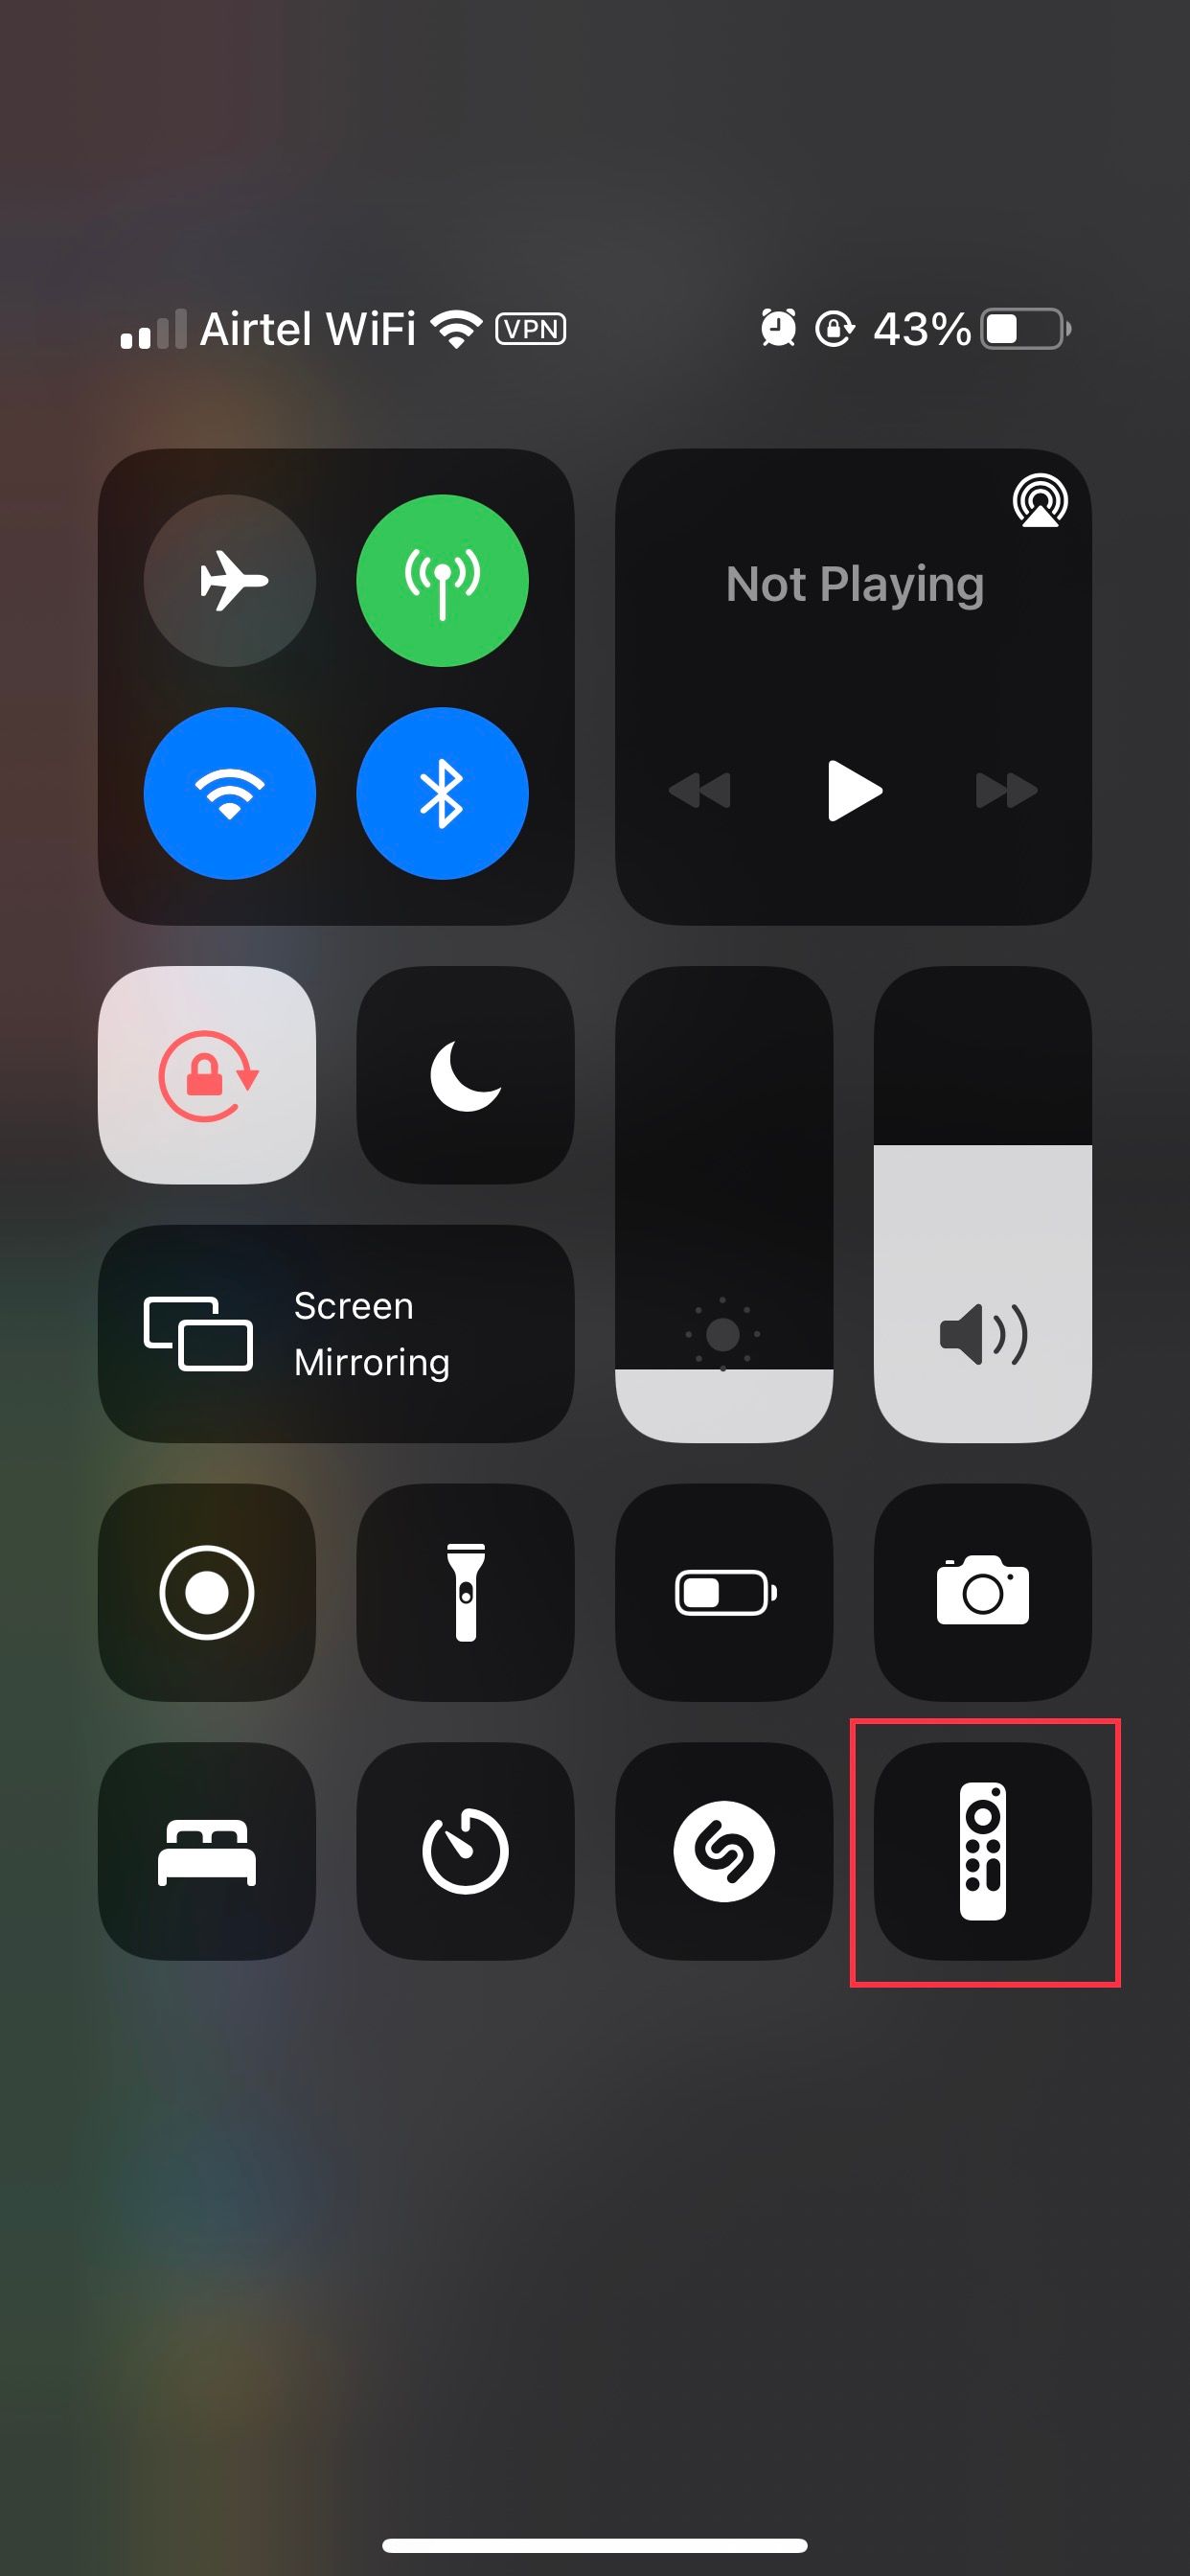 Apple TV remote app in the Control Center on iPhone